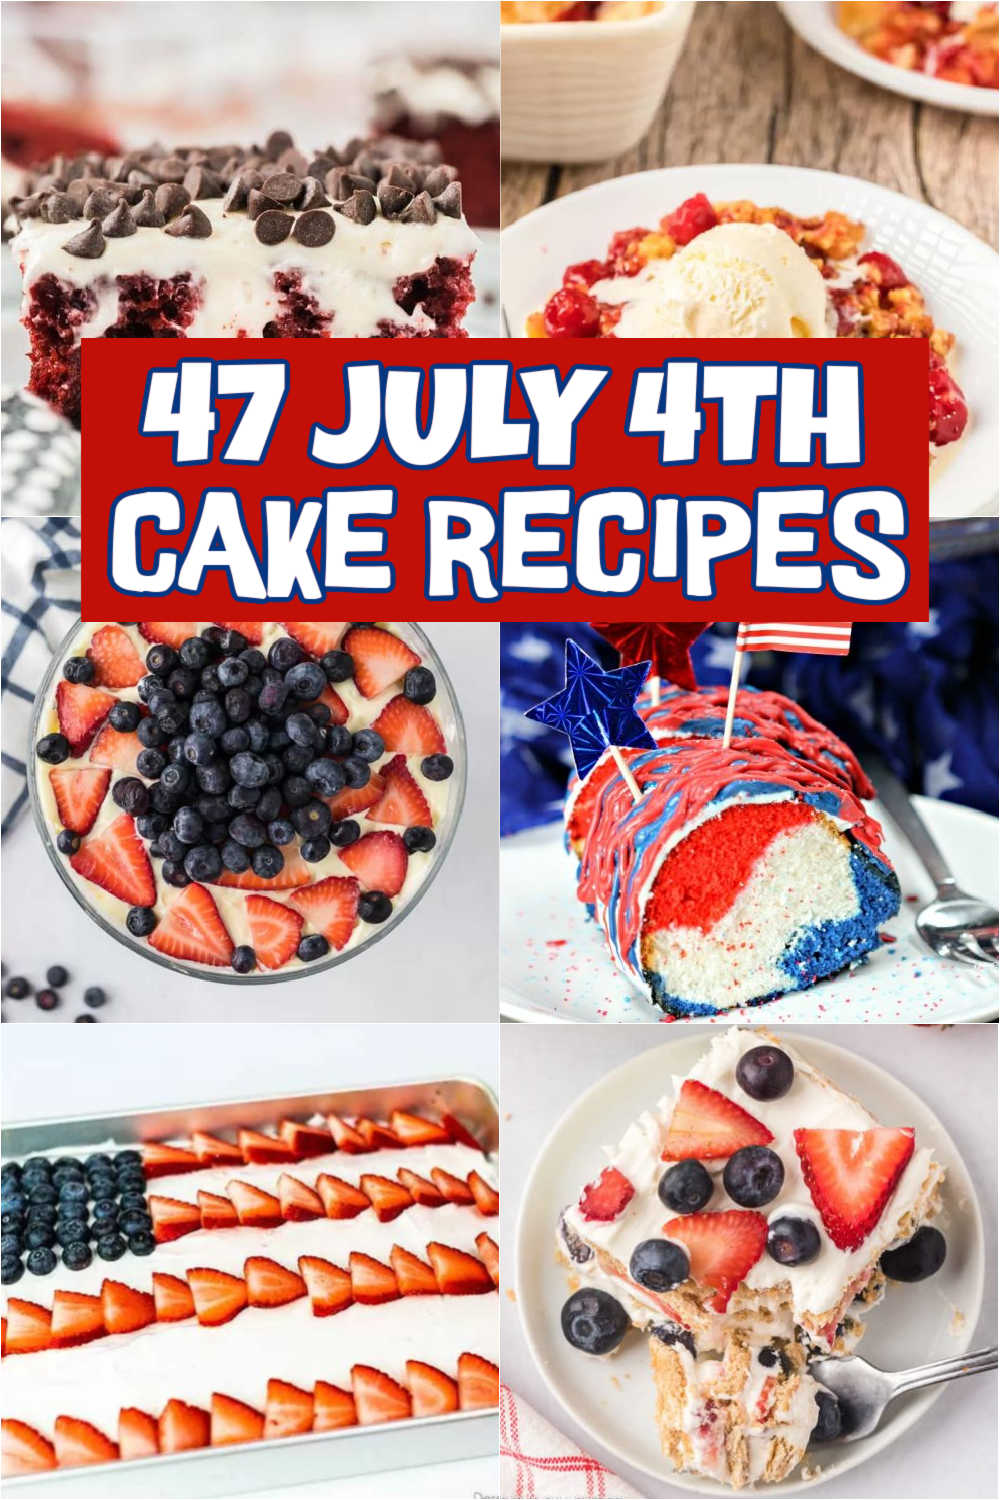 If there’s one thing that rivals fireworks every 4th of July, it’s the 4th of July cake. Make these easy and delicious cakes for your party! We’ve rounded up some of the best 4th of July cake recipes that will satisfy everyone's sweet craving. #eatingonadime #4thofjulycakes #cakerecipesforjuly4th #4thofjulydesserts